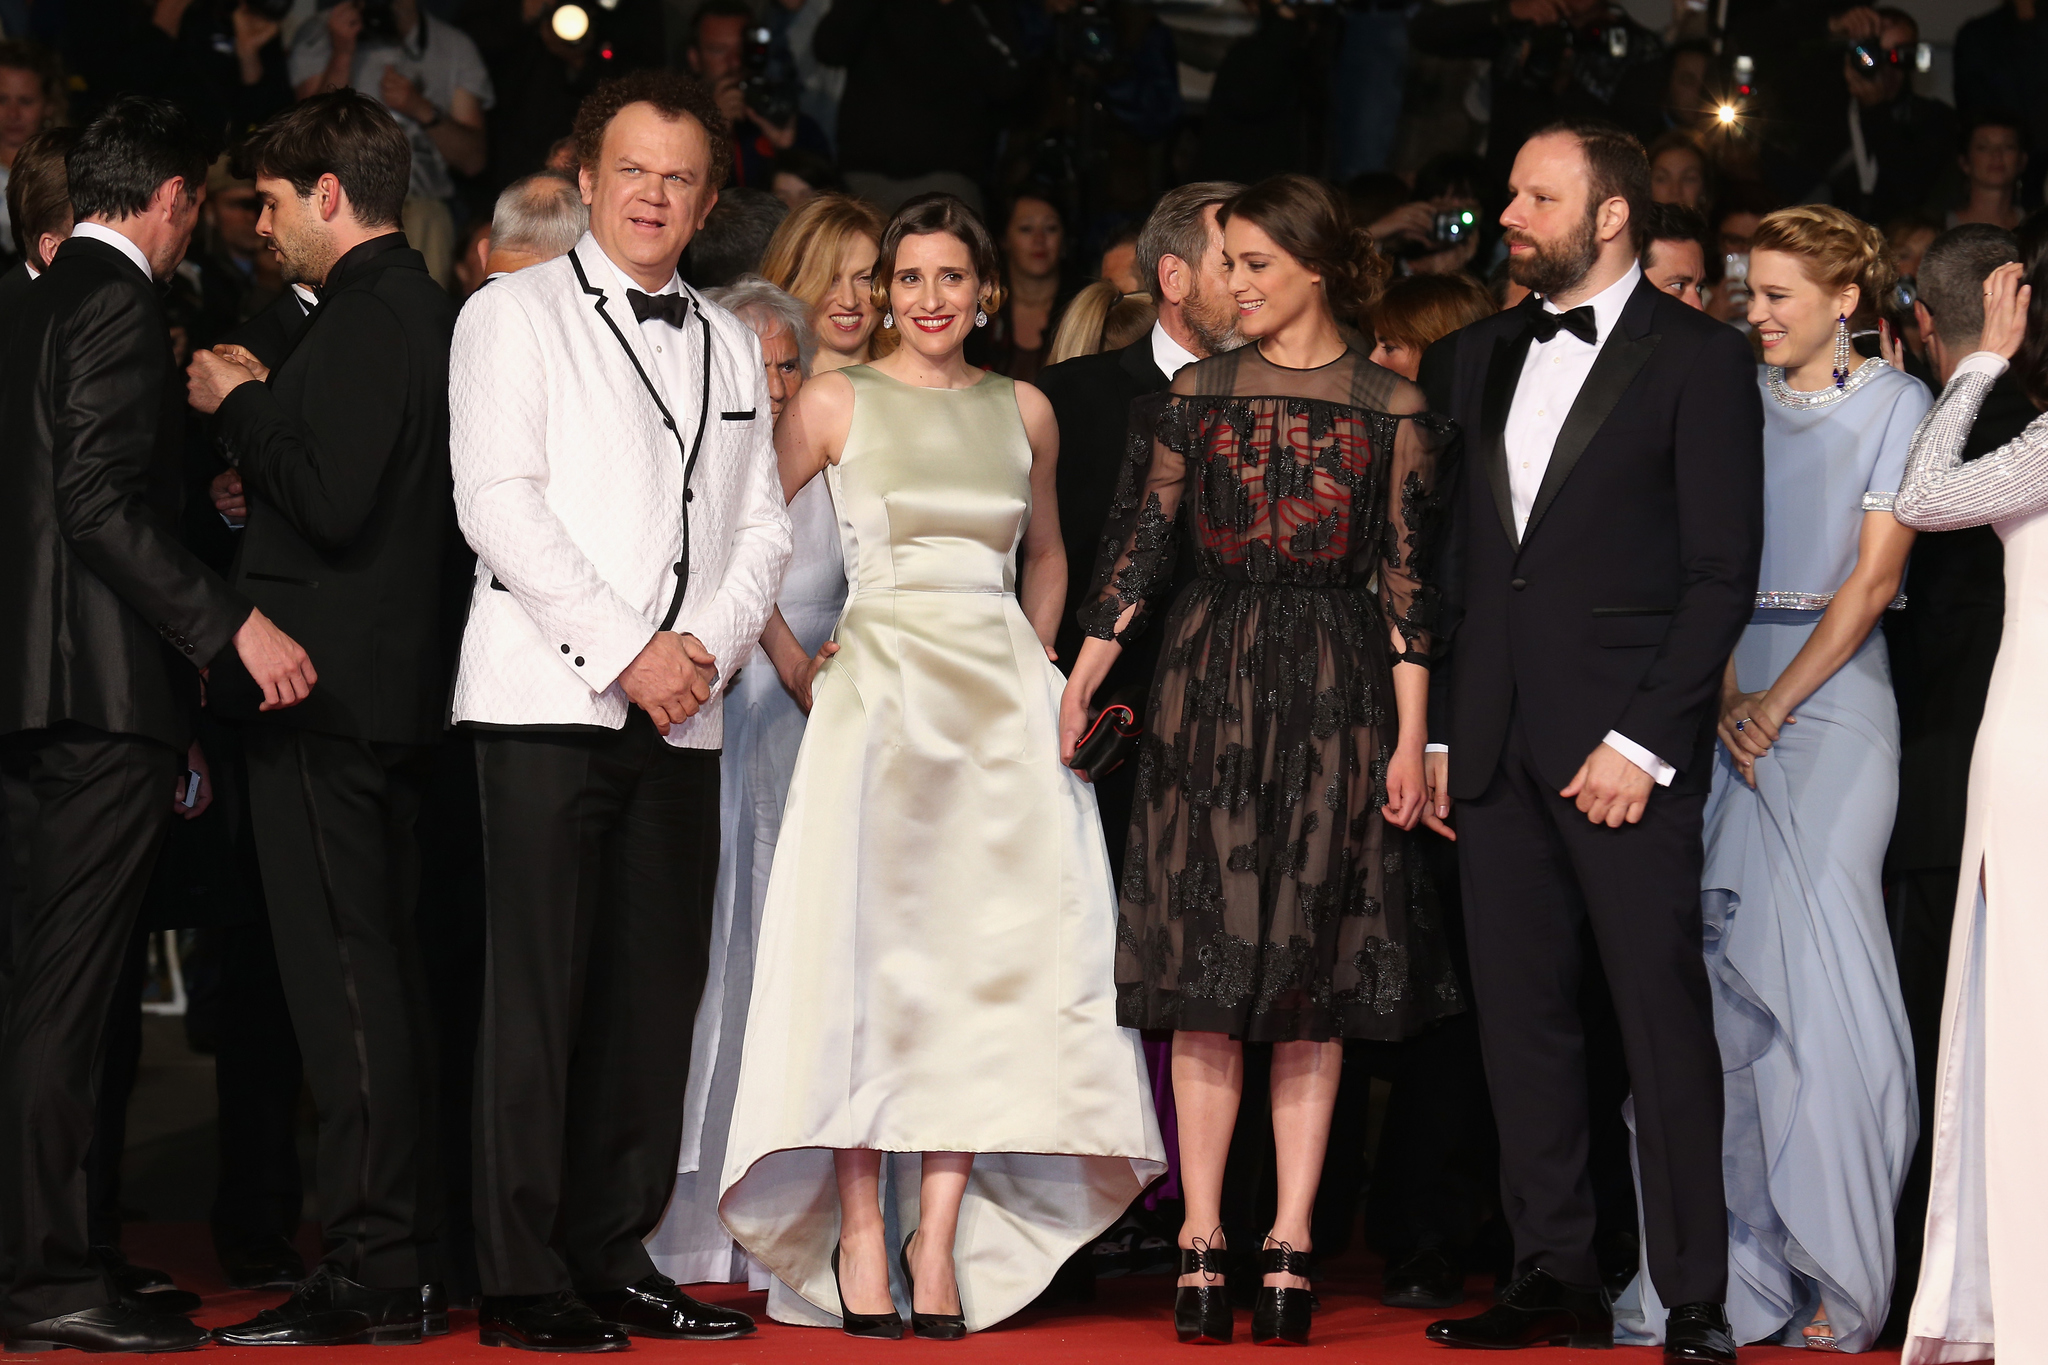 John C. Reilly, Yorgos Lanthimos, Angeliki Papoulia, Léa Seydoux and Ariane Labed at event of The Lobster (2015)